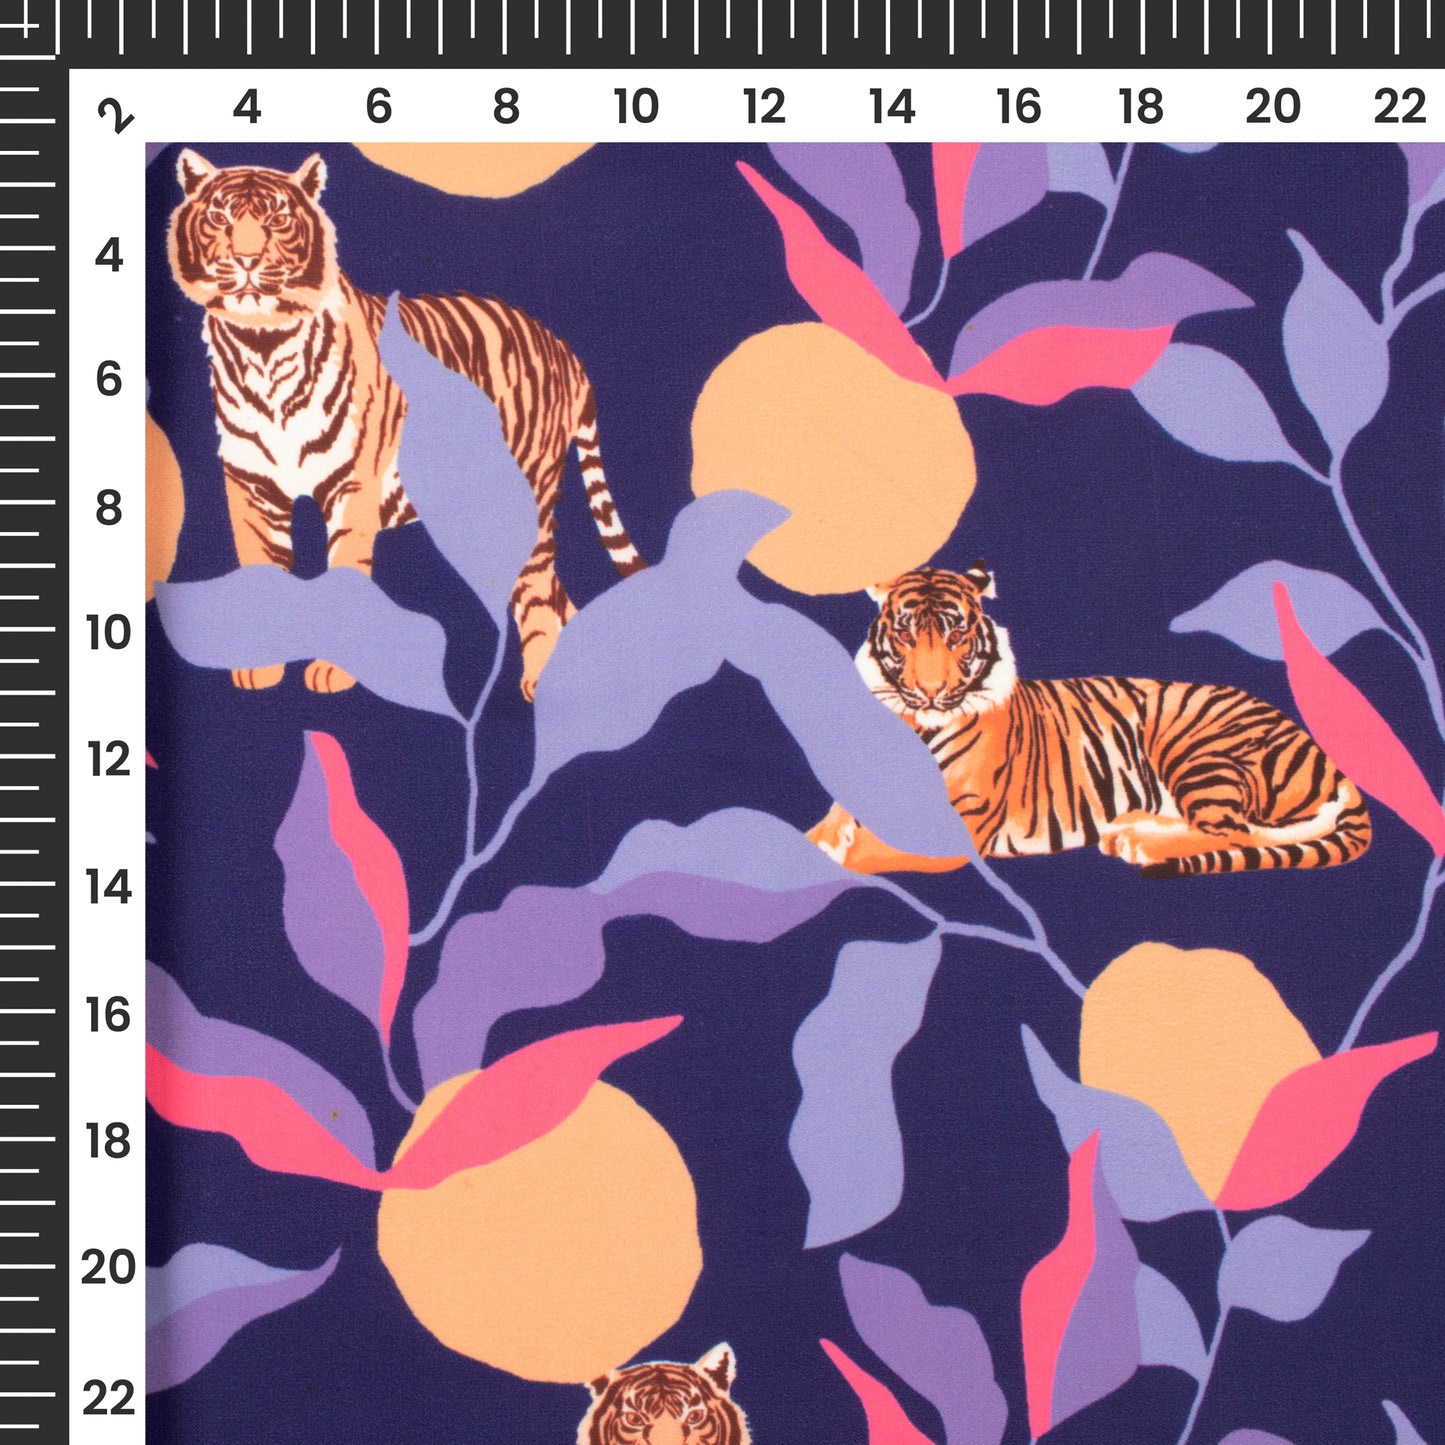 Exclusive Tiger Digital Print Imported Satin Fabric